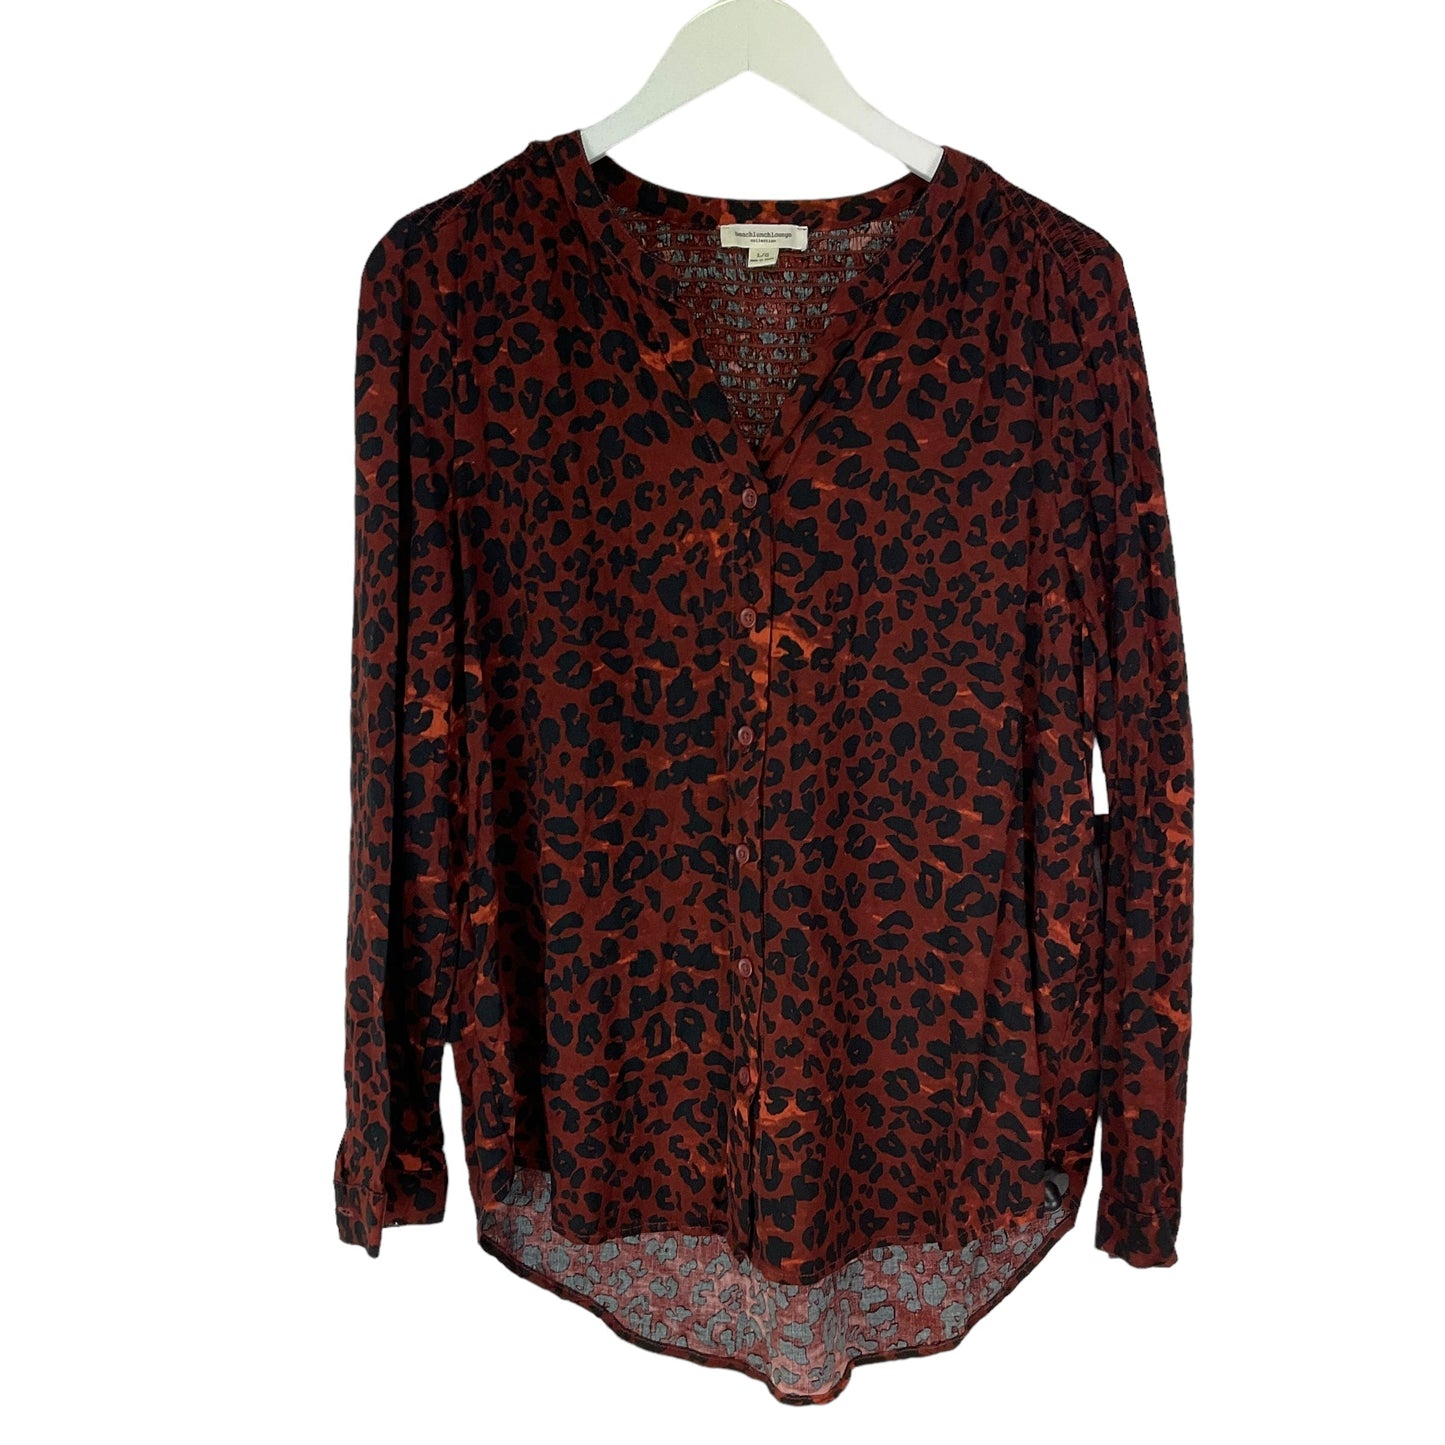 Animal Print Top Long Sleeve Beachlunchlounge, Size L